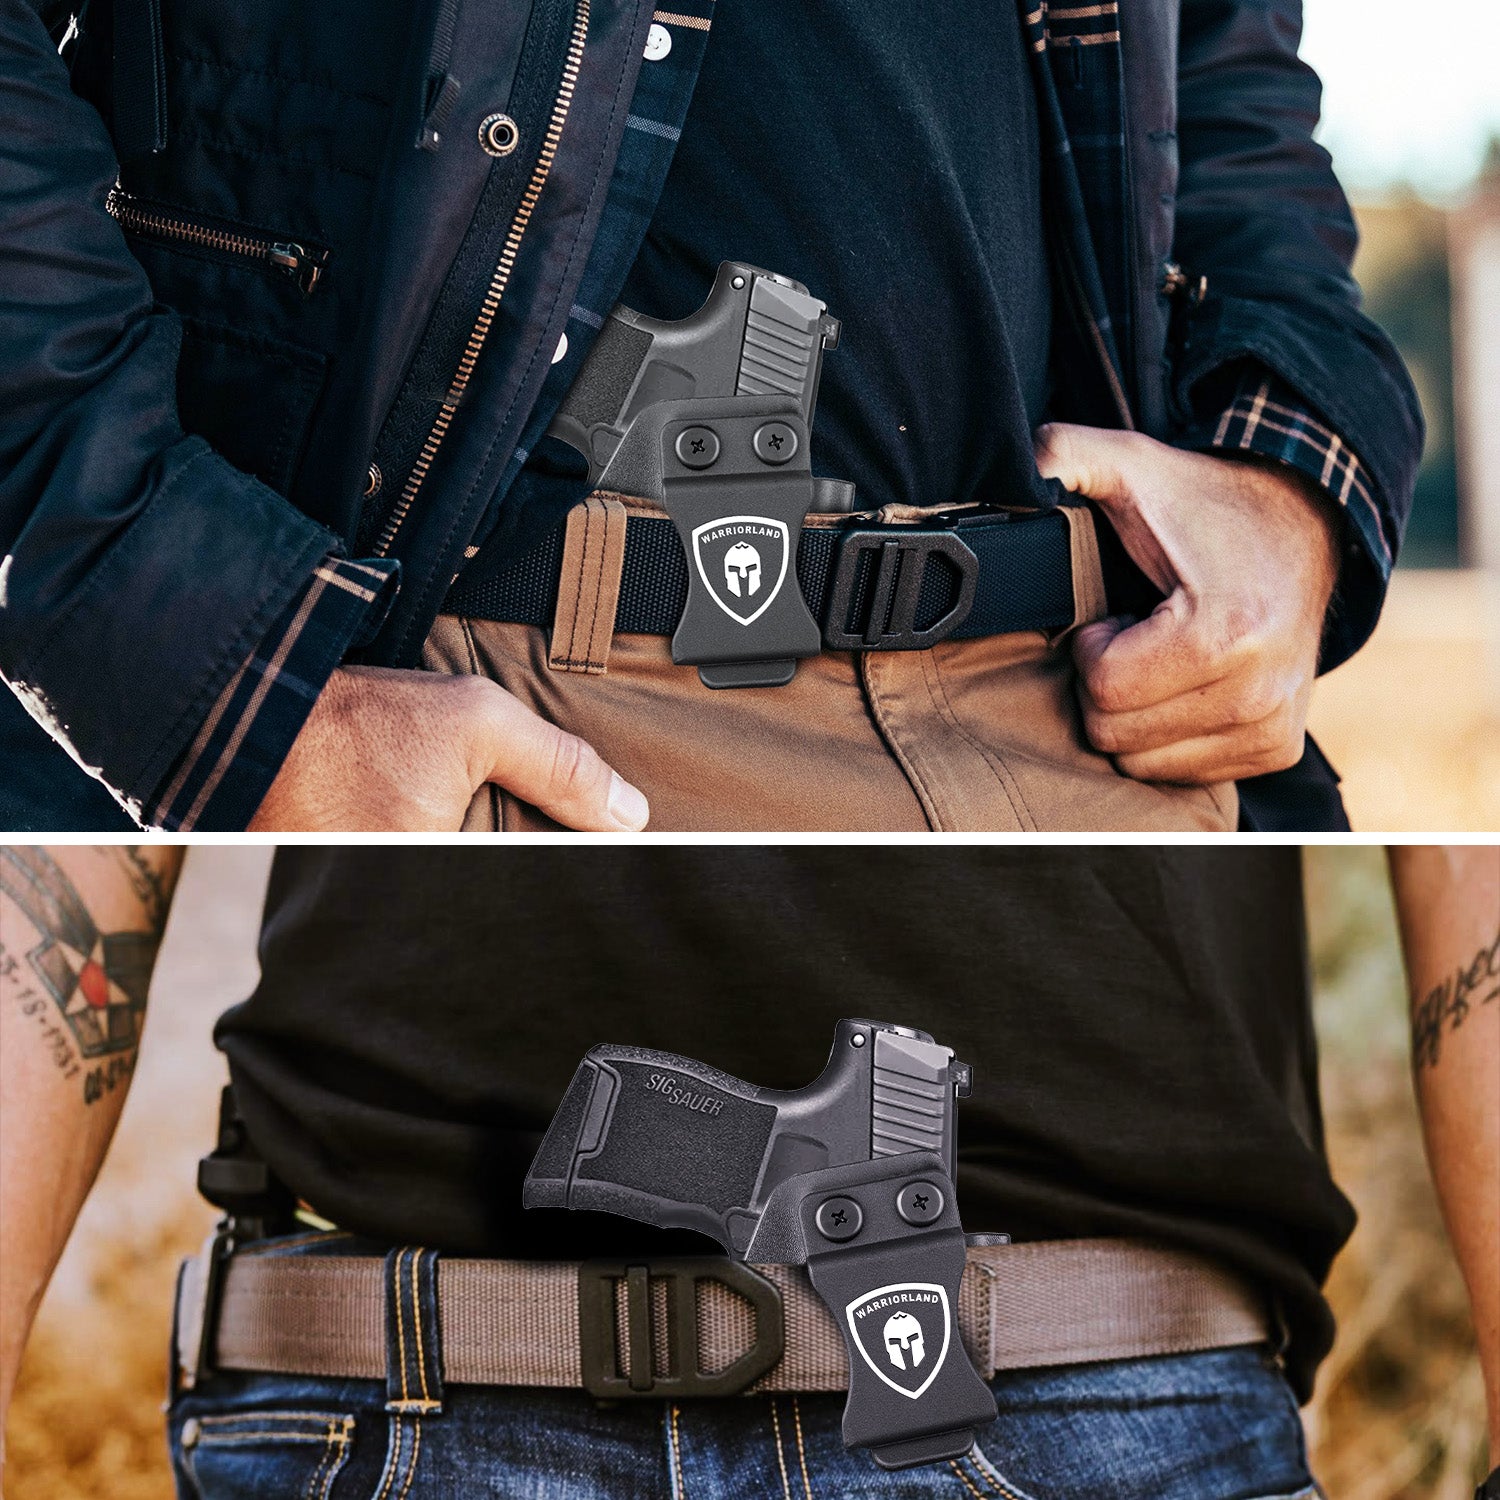 P365 TLR6 Holster IWB Kydex Holster Optic Cut Fit P365/P365X/P365 SAS/P365XL w/TLR-6, Inside Waistband Concealed Carry Holster, Adj. Cant & Retention, Right Hand|WARRIORLAND